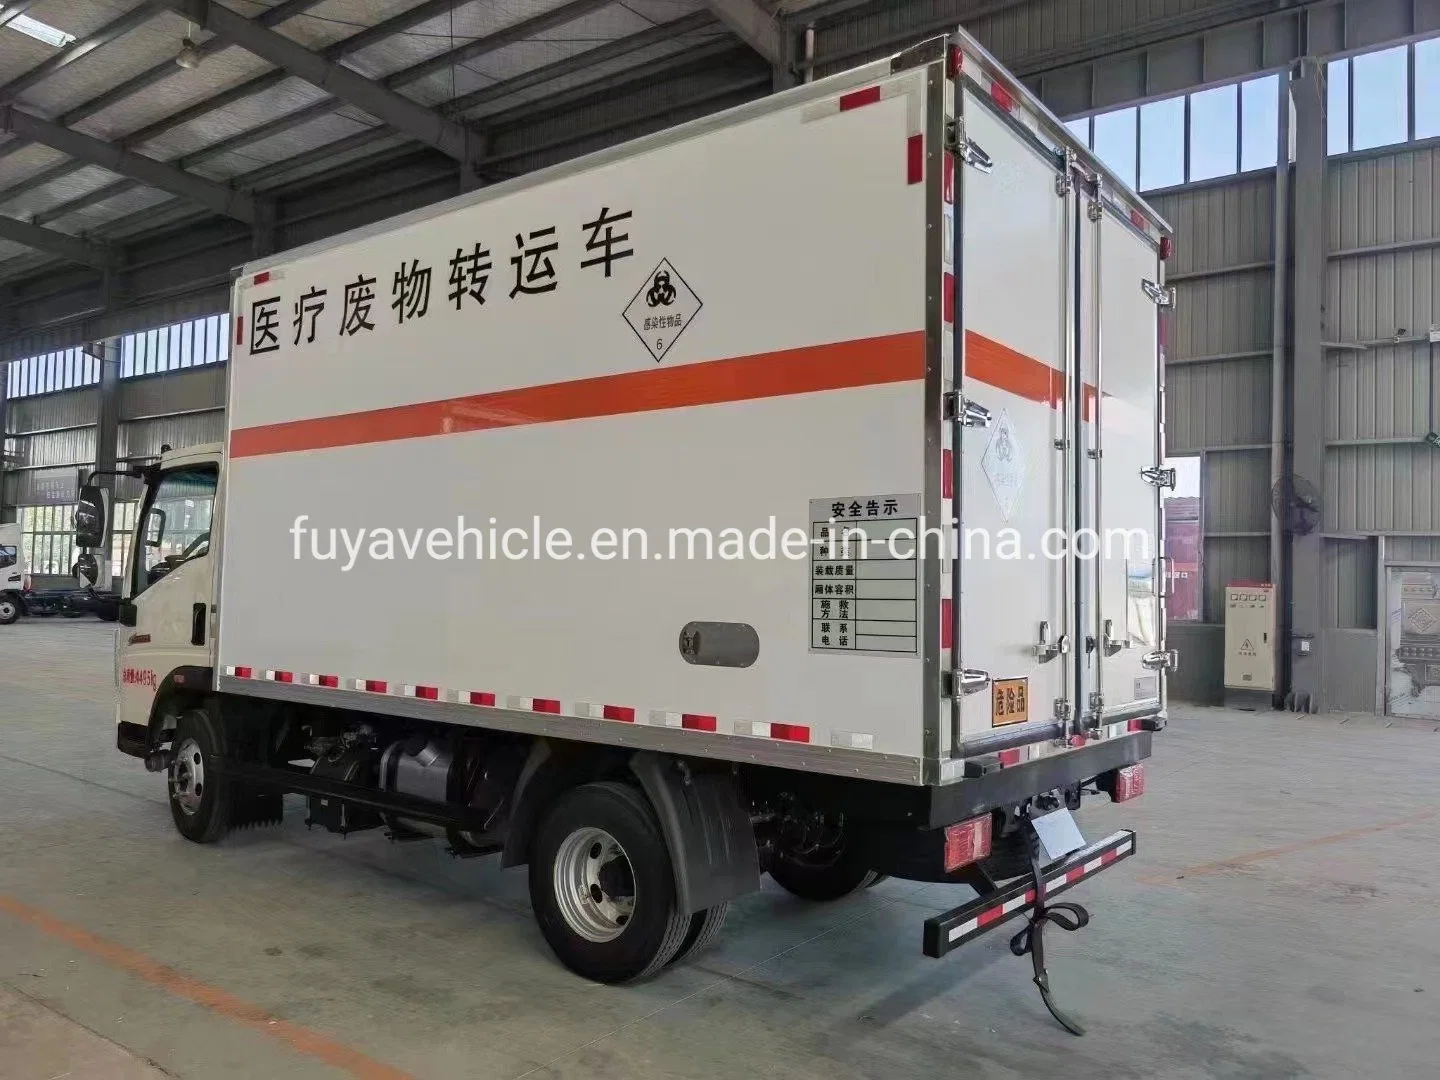 Sinotruk HOWO 5 Tons 4X2 Medical Waste Delivery Truck for Hospital Waste